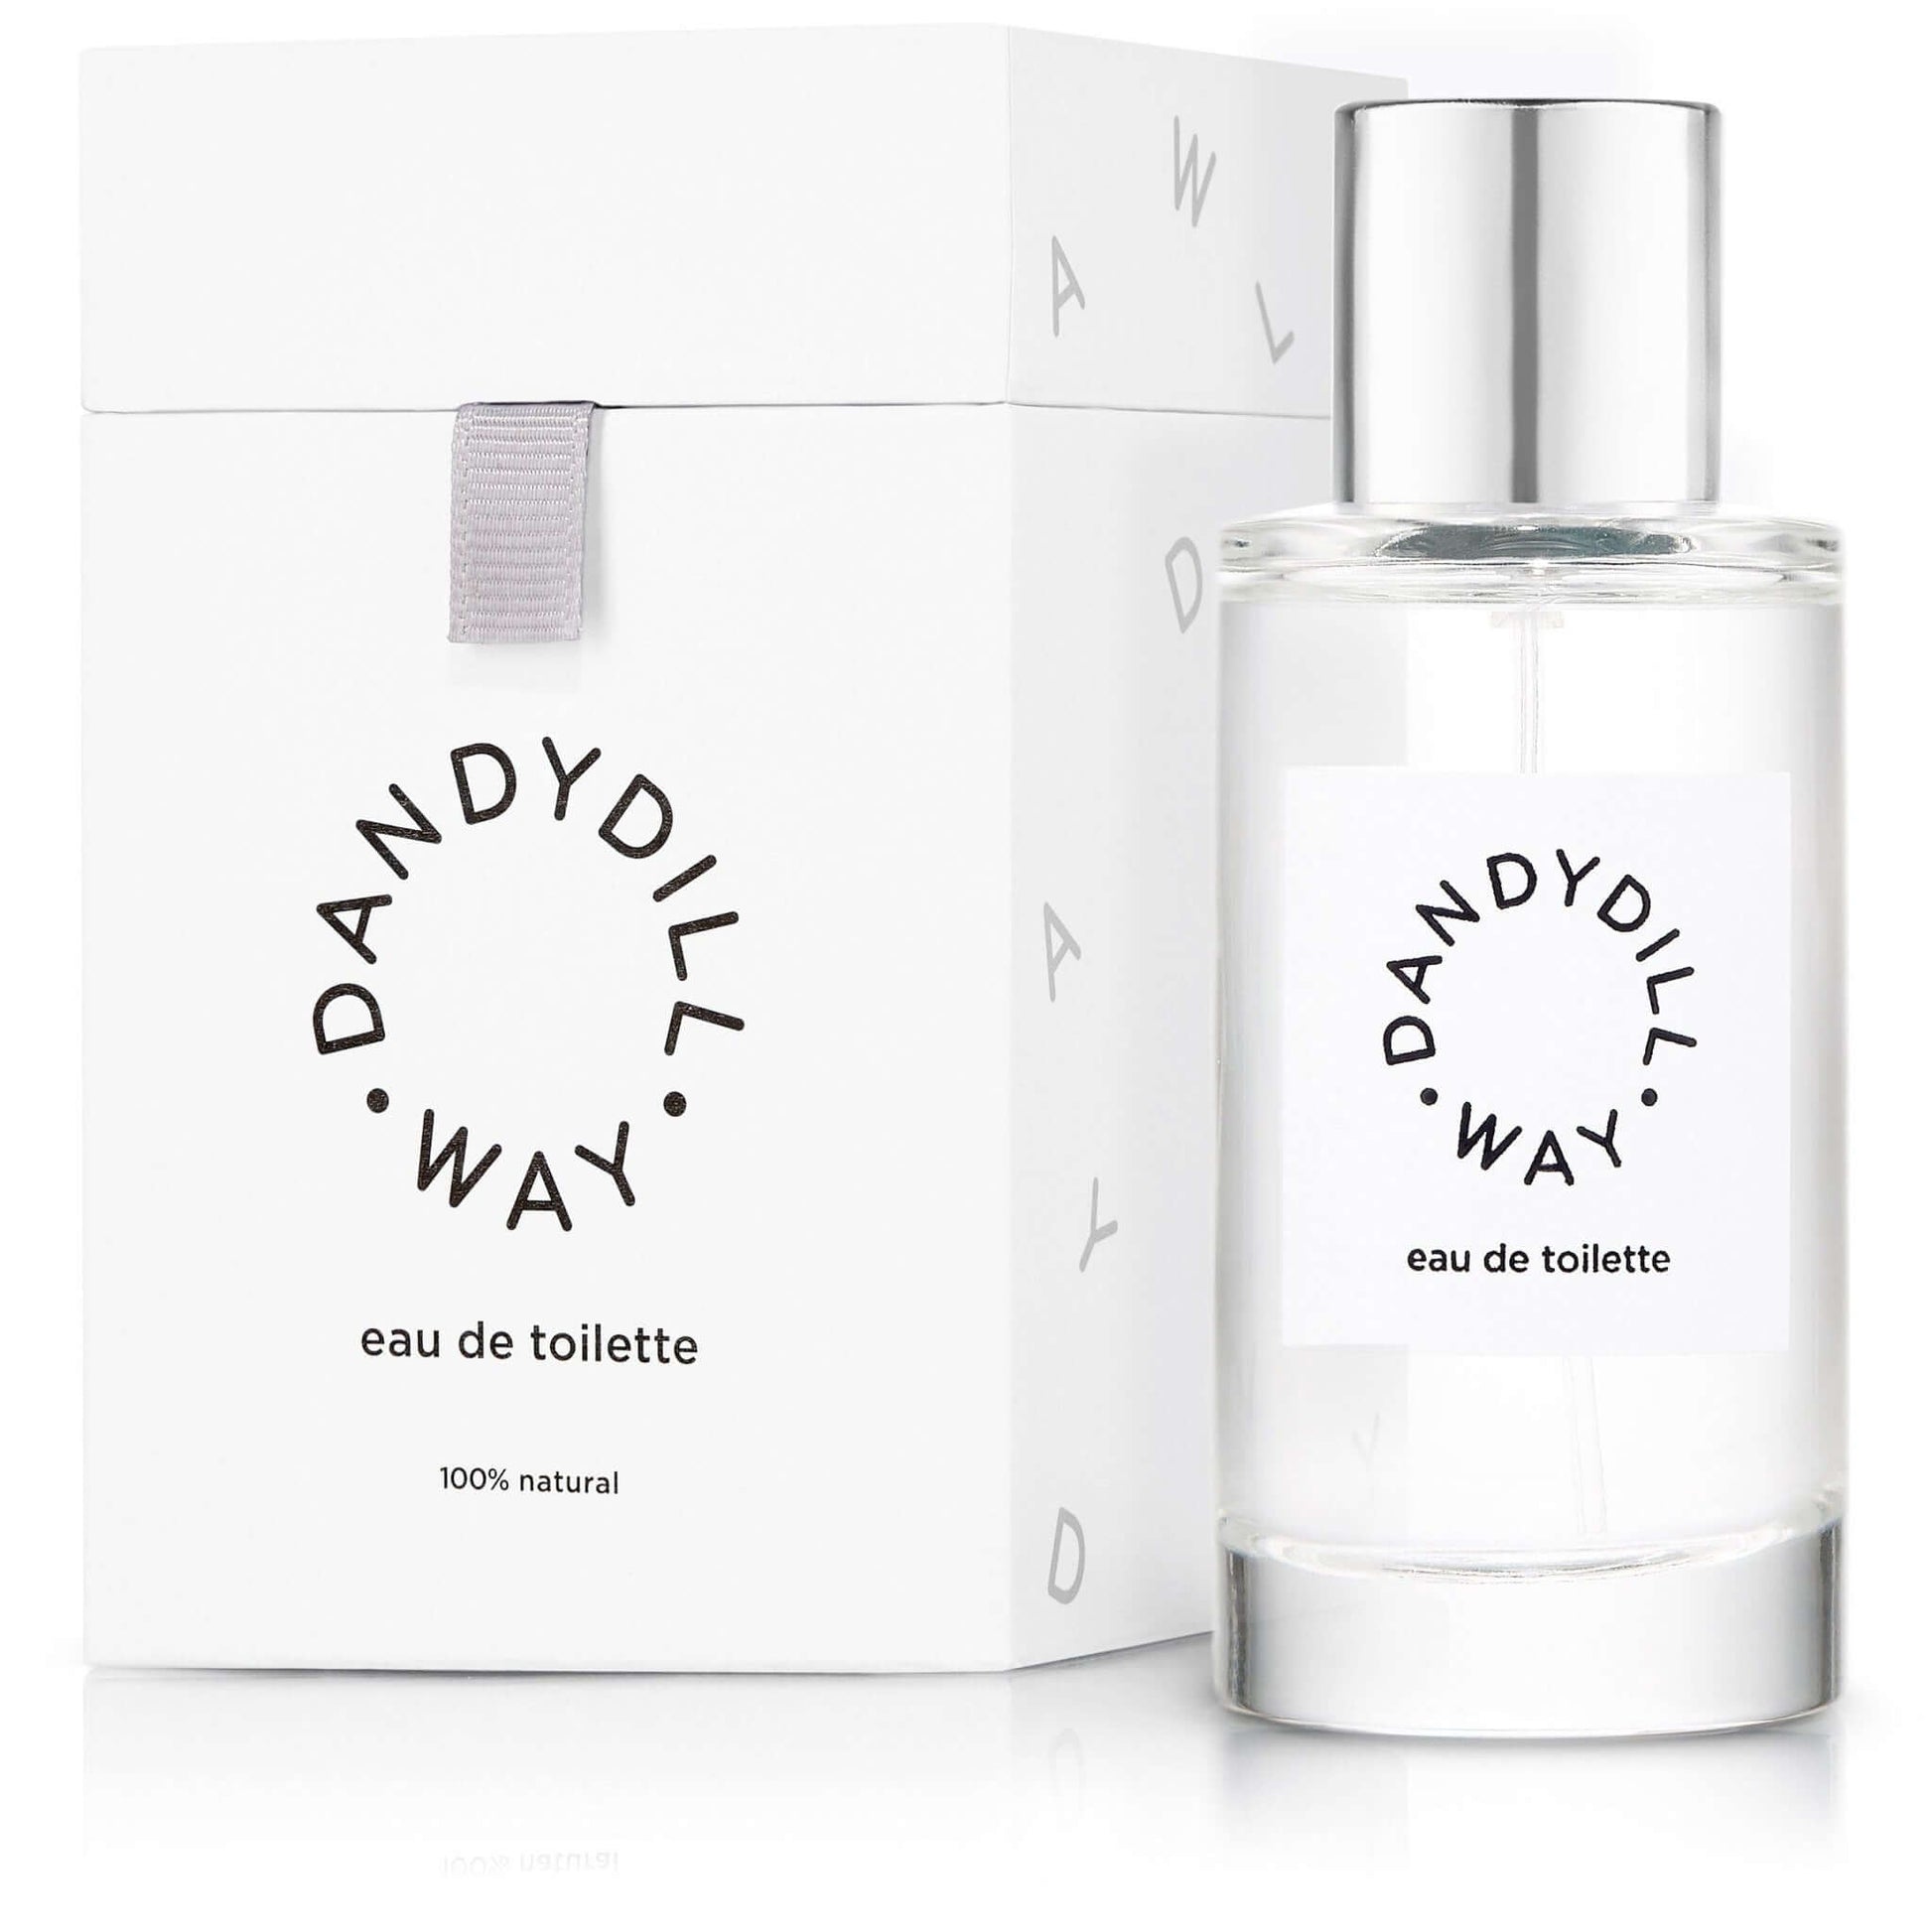 Organic, natural perfume 50ml bottle and ribbon gift box, Signature Eau de Toilette 50ml from Dandydill Way